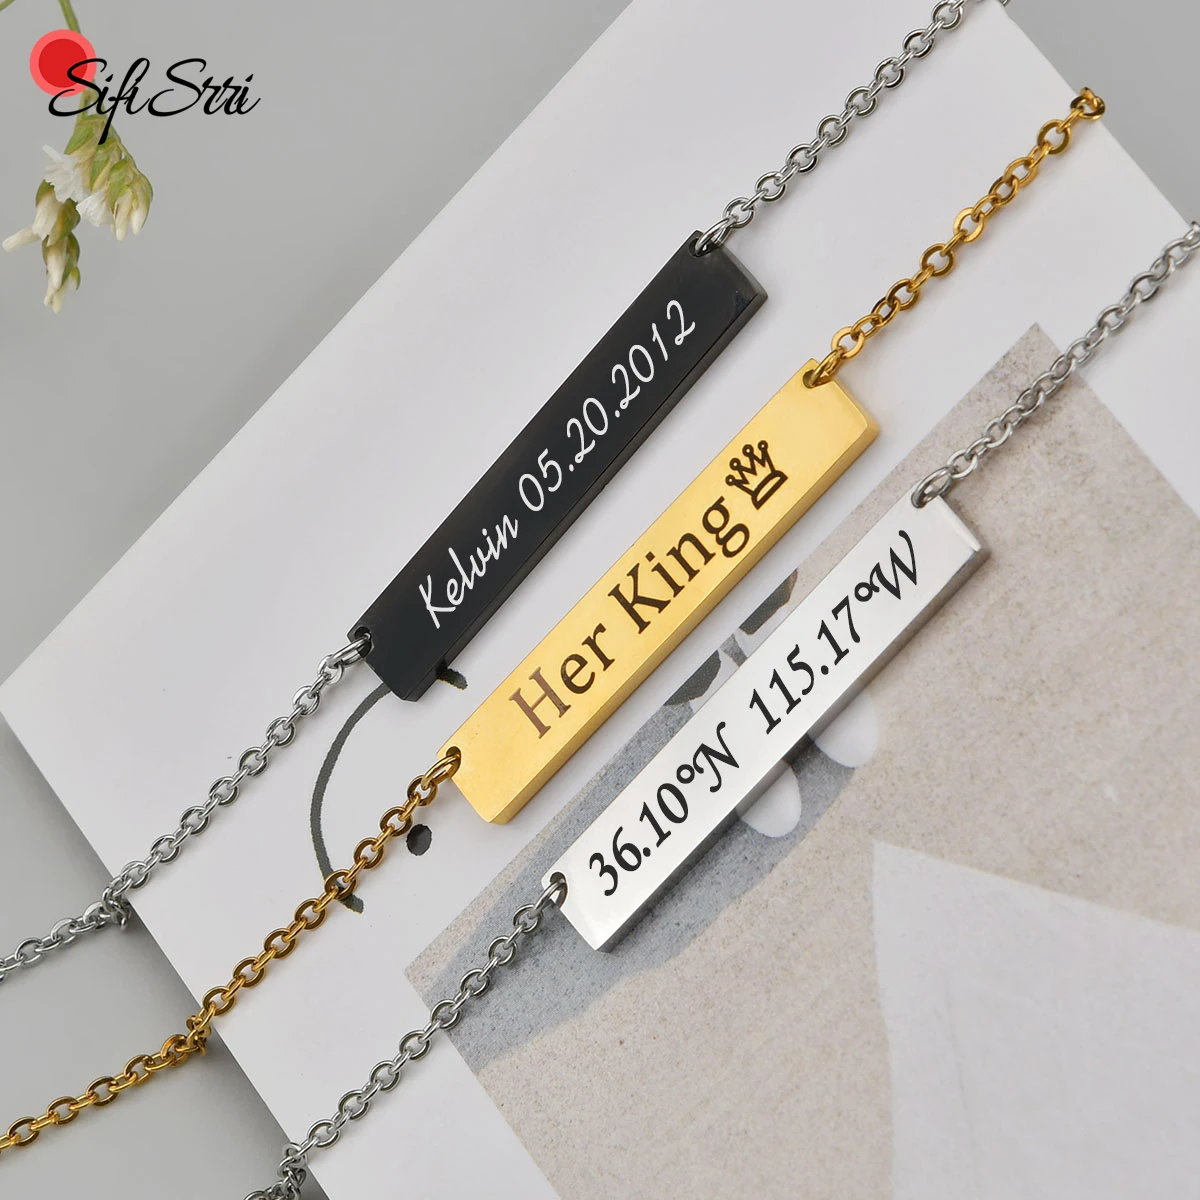 

Sifisrri Personalized Engrave Name ID Date Bar Necklace For Women Stainless Steel Customized Jewelry Birthday Gift Accessories